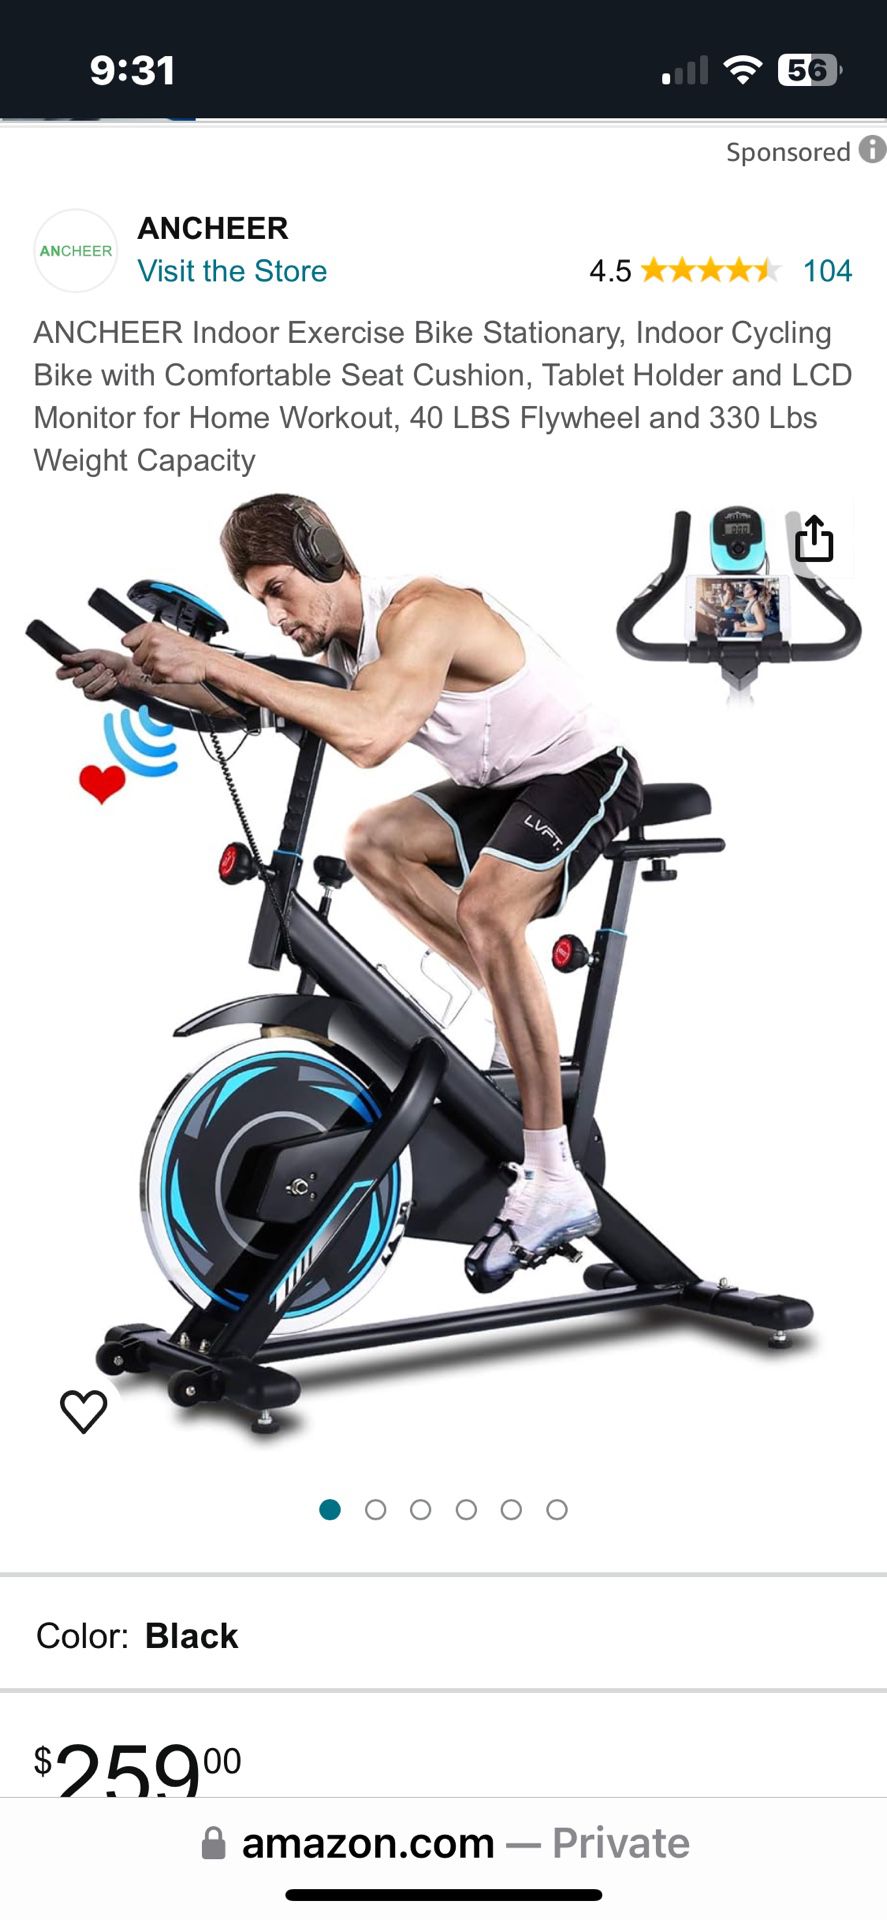 ANCHEER Indoor Exercise Bike Stationary, Indoor Cycling Bike with Comfortable Seat Cushion, Tablet Holder and LCD Monitor for Home Workout